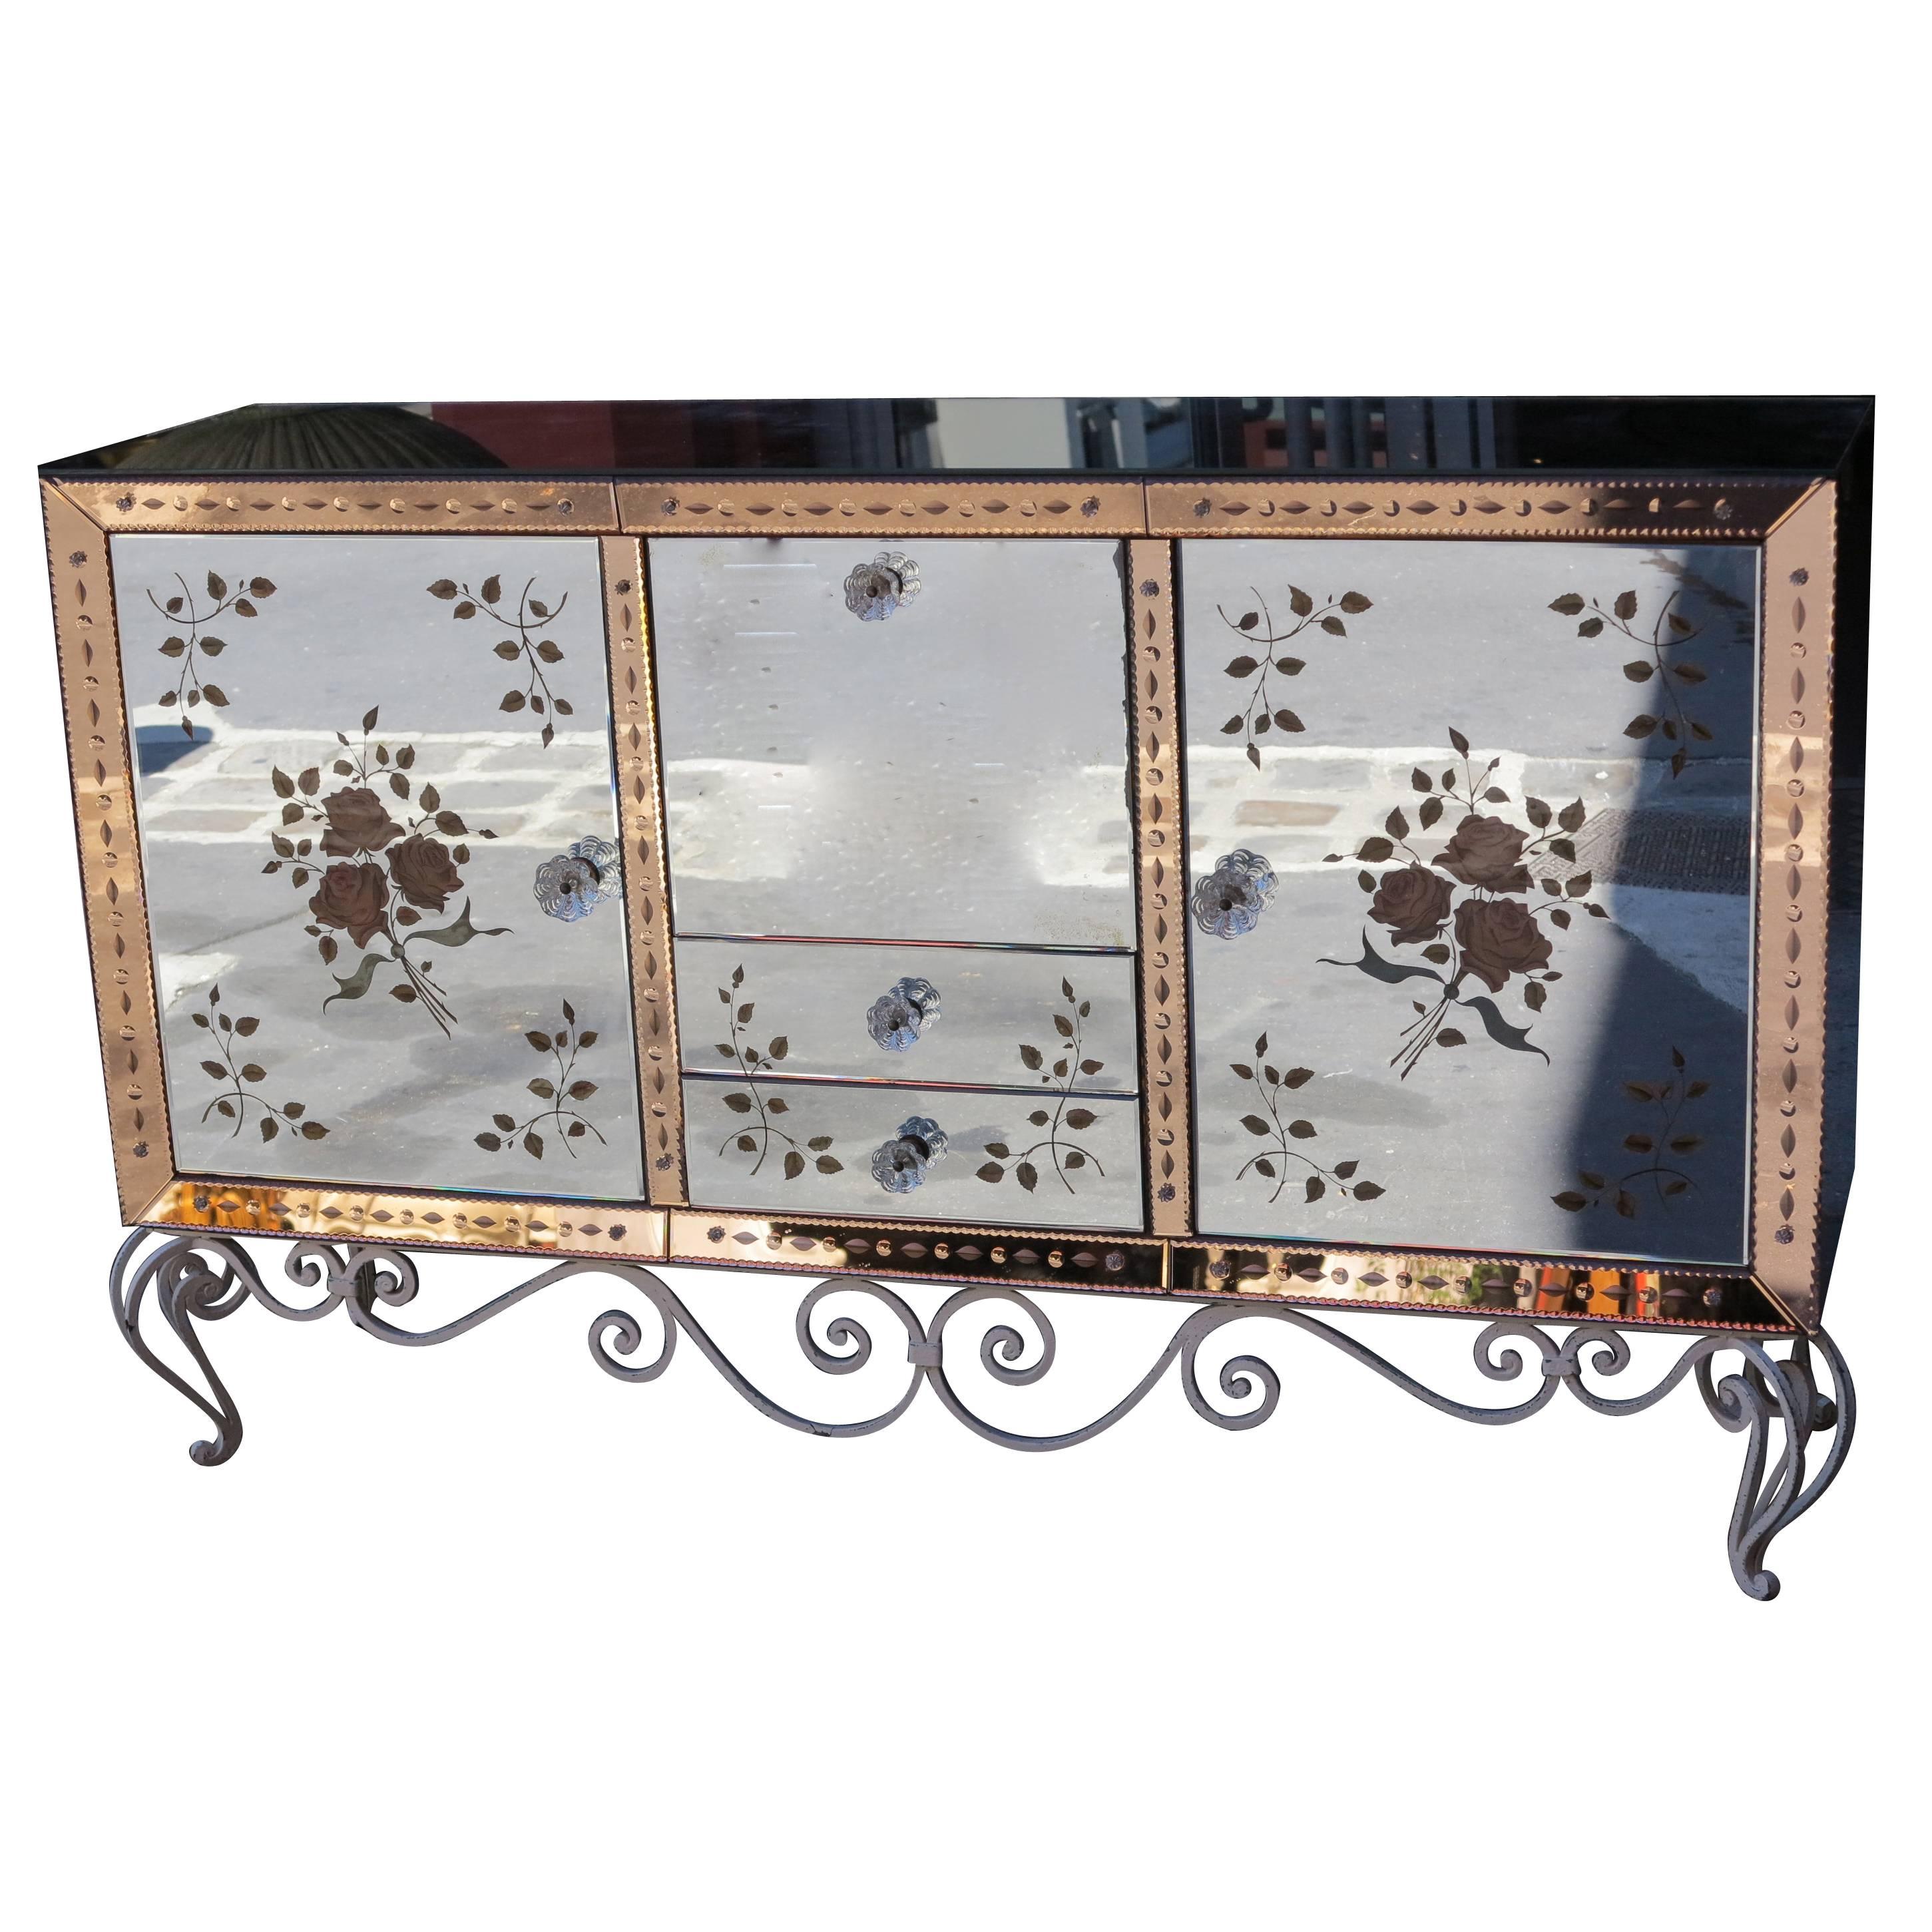 1970 Sideboard Mirror with Eglomisées Flowers